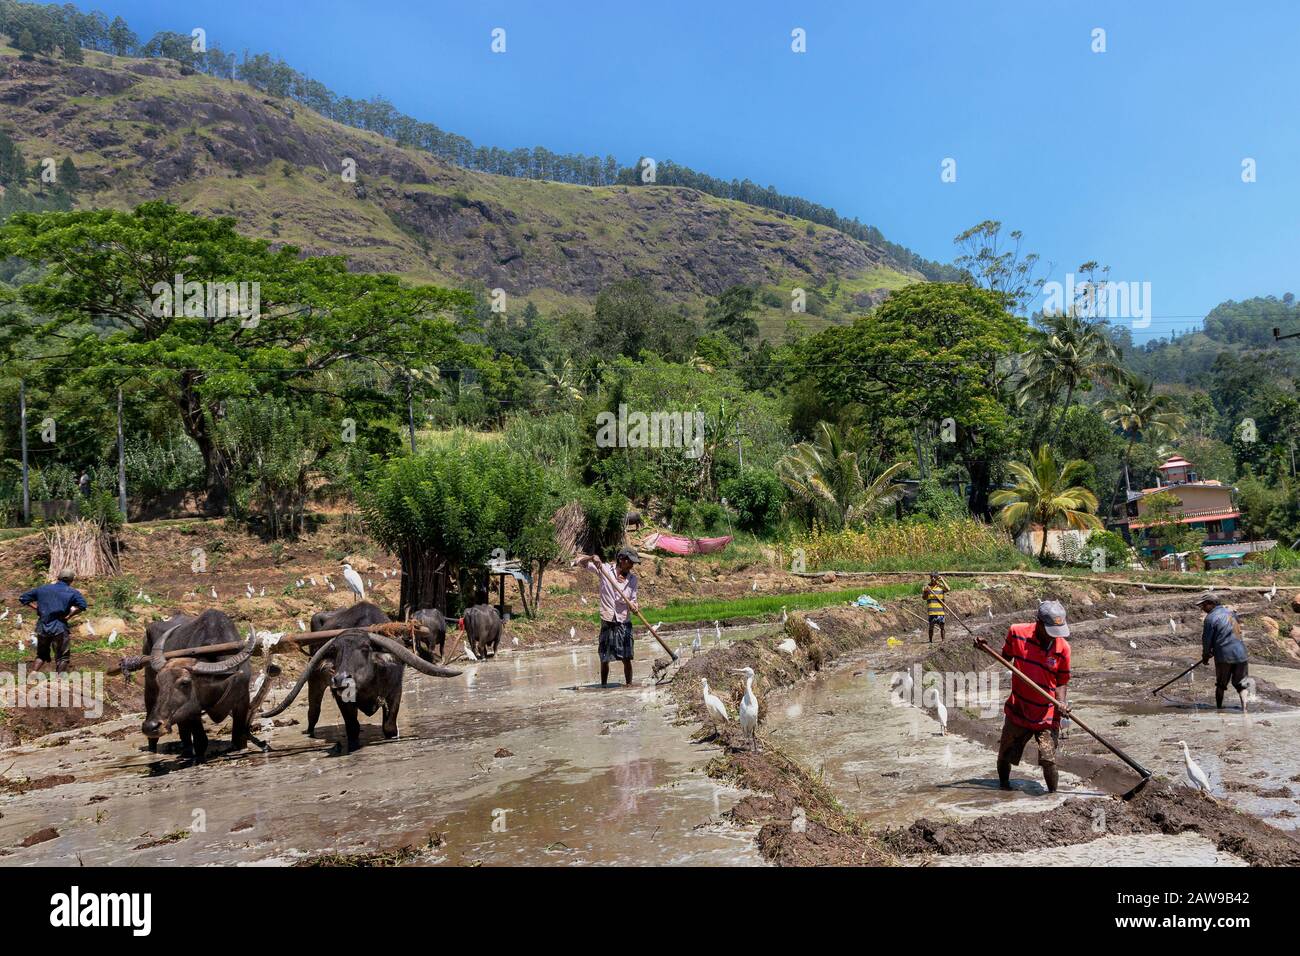 Rice fields being plowed by local people and also using buffalos, in Uda Walawe, Sri Lanka Stock Photo